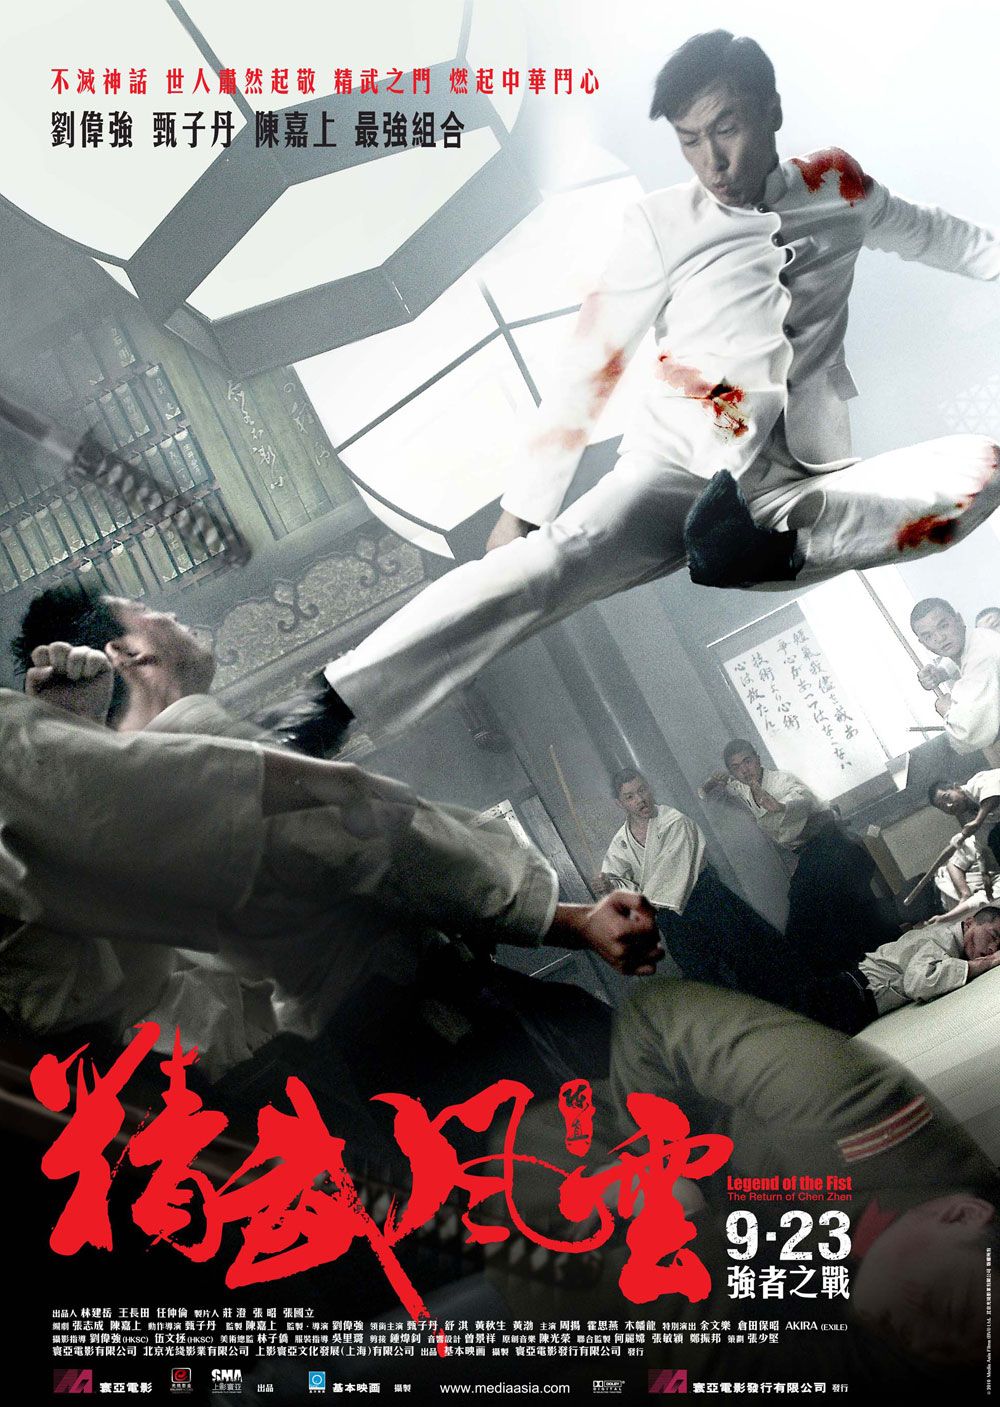 Extra Large Movie Poster Image for Jing mo fung wan: Chen Zhen (#3 of 5)